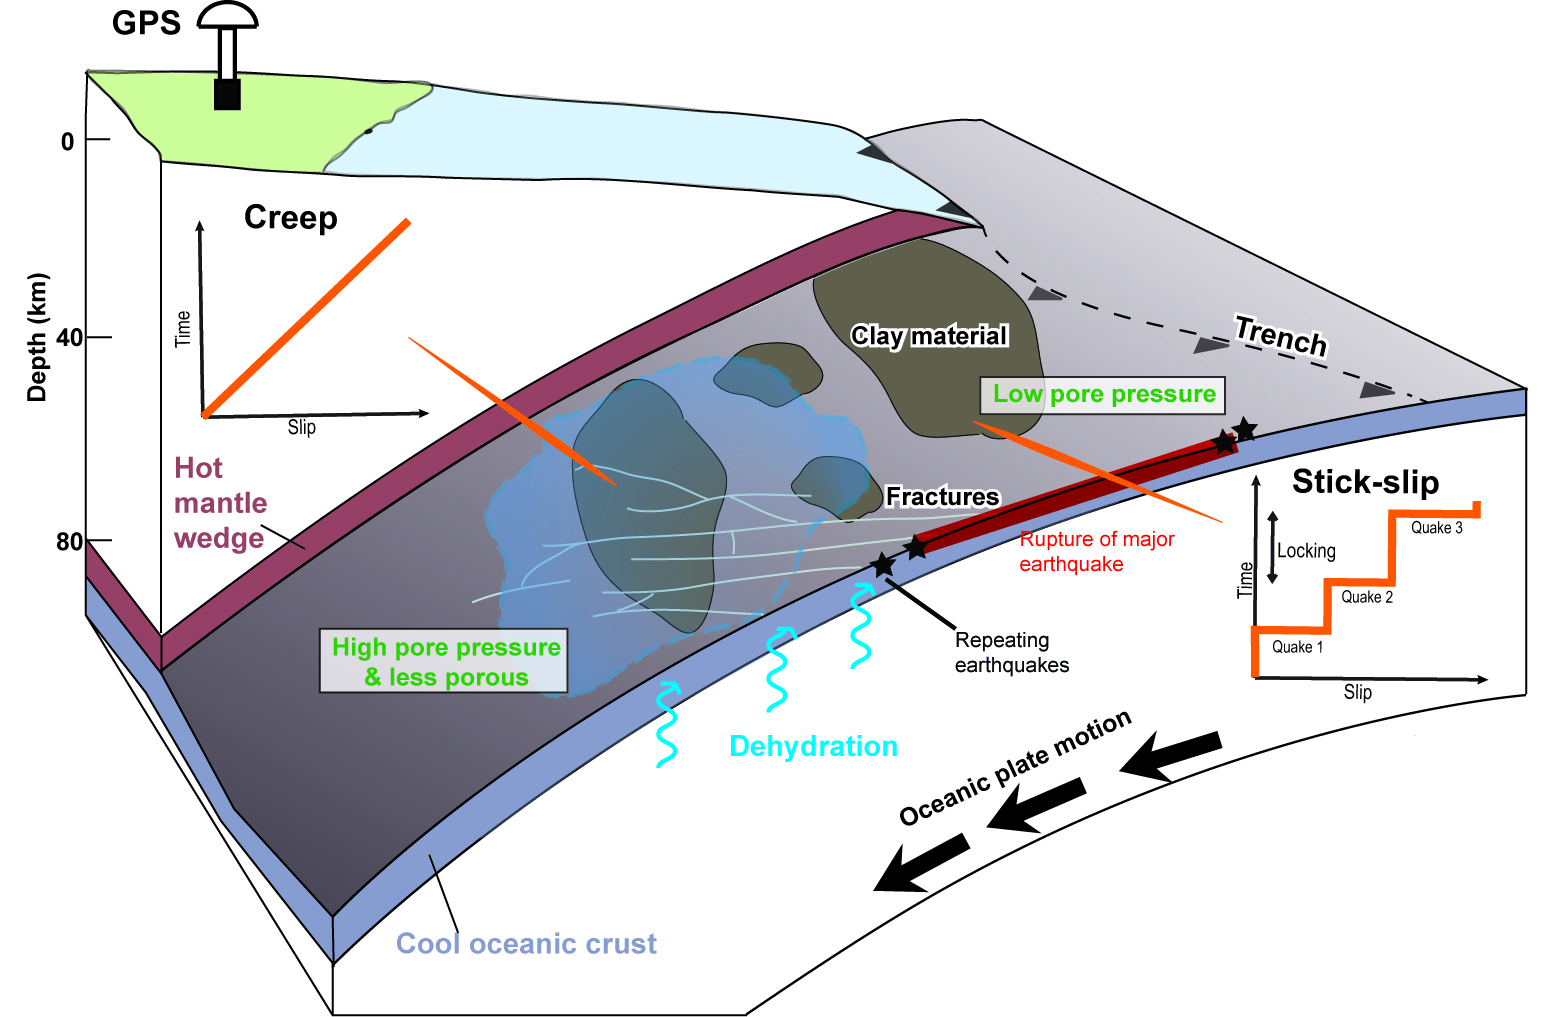 A conceptual model of the creep mechanism in northeast Japan